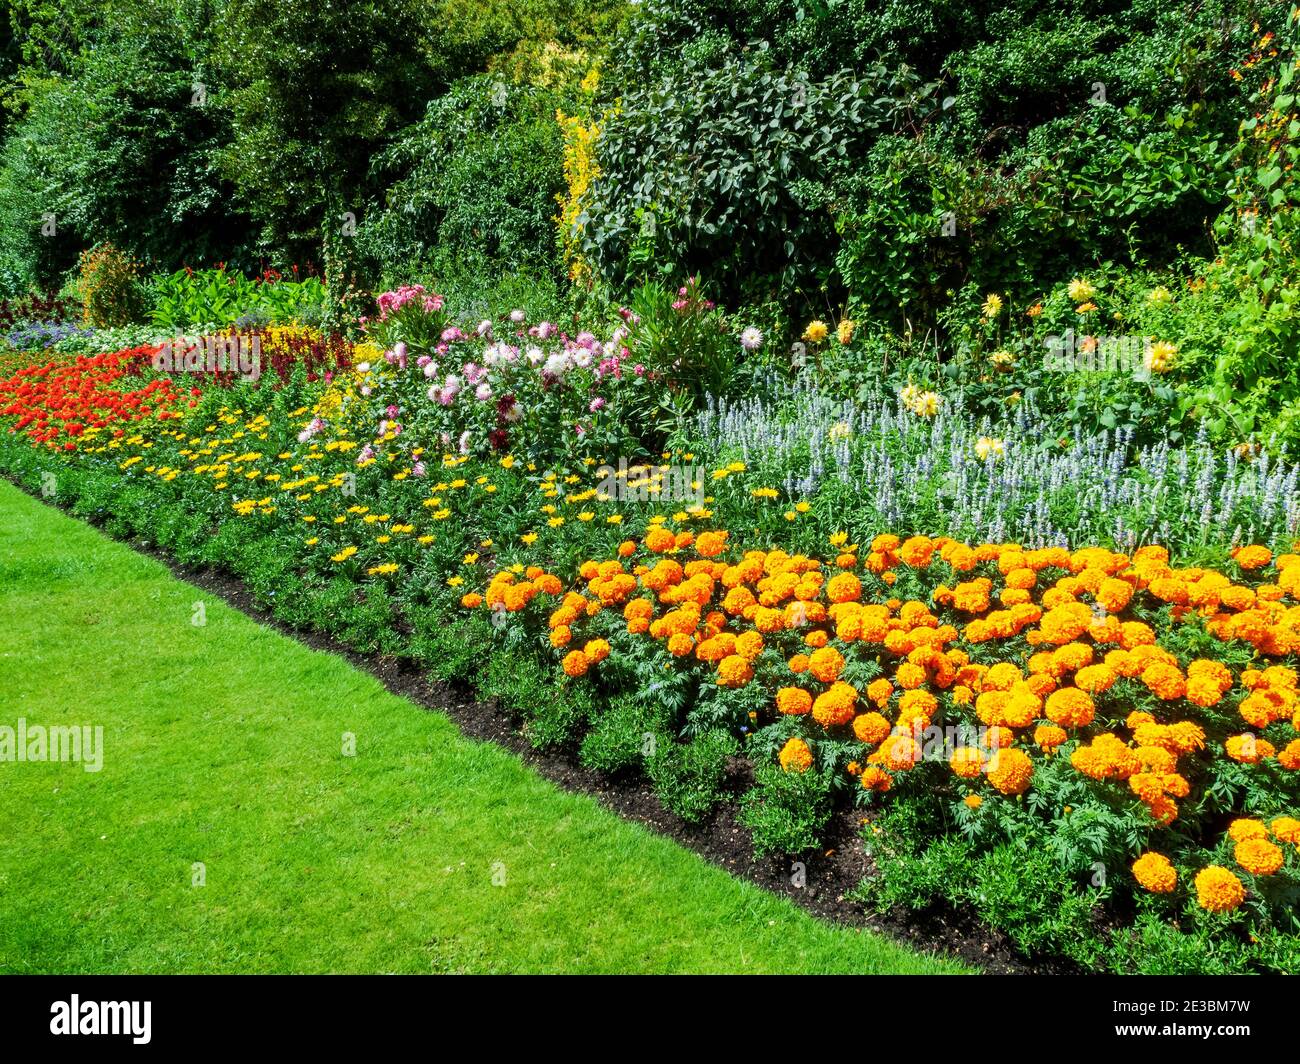 Flower bed border with marigolds which are a yellow summer flowering plant growing in a public park formal garden in July, stock photo image Stock Photo